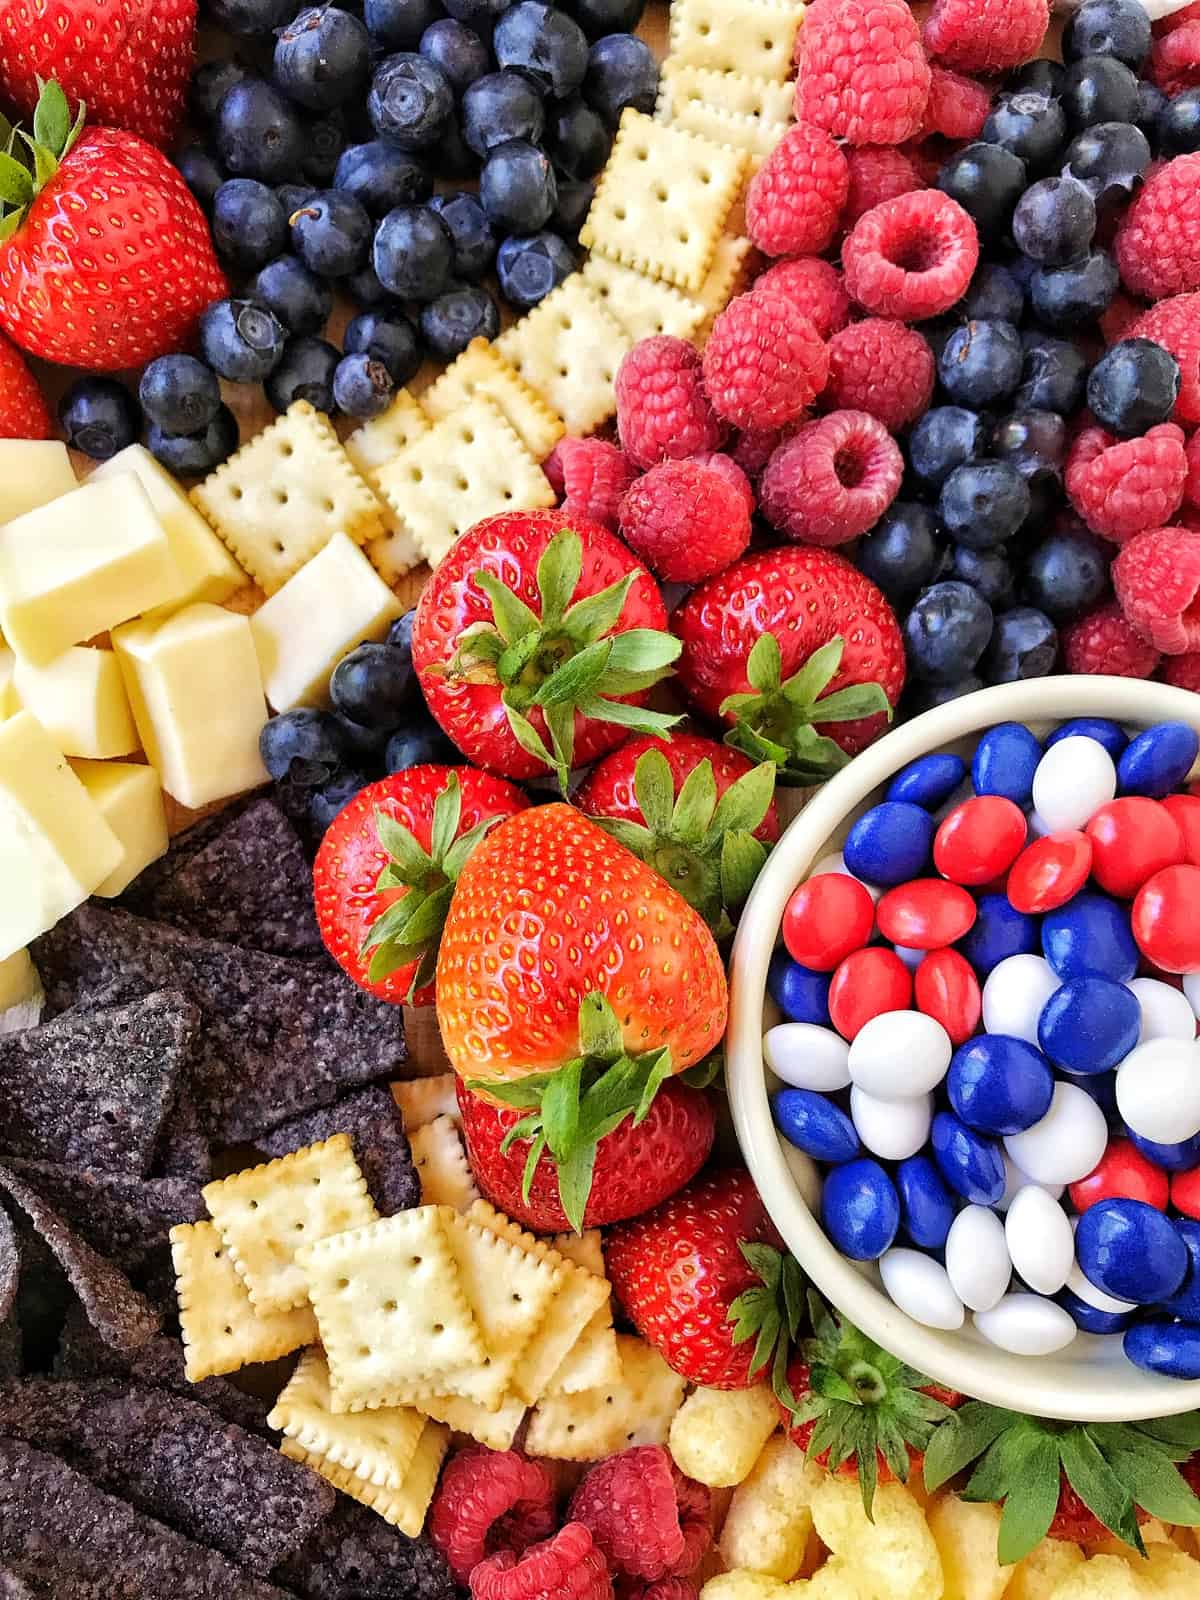 Red White and Blue Snack Board